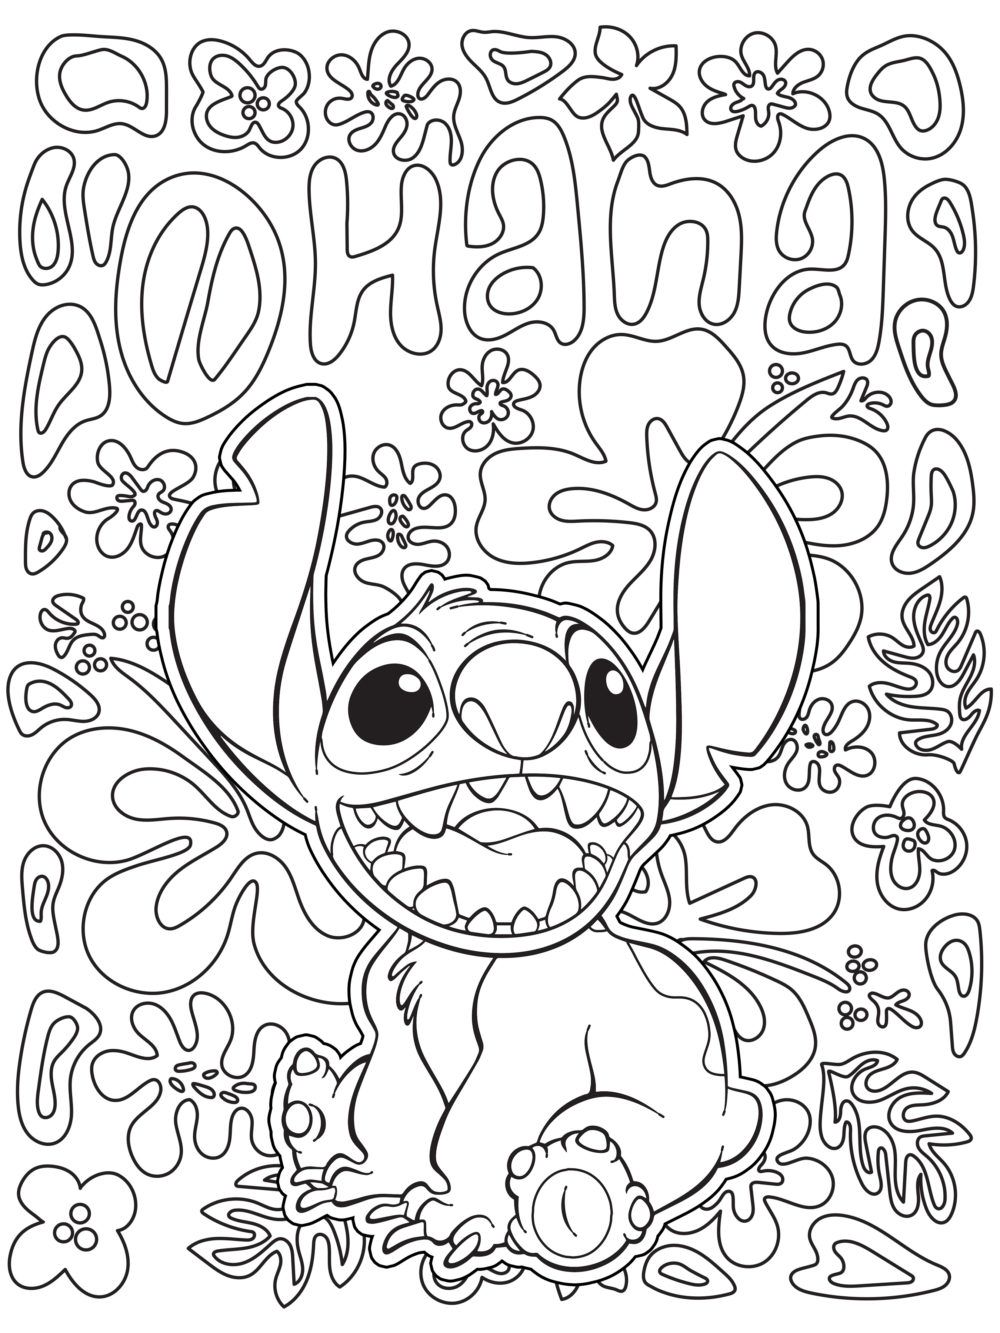 Disney Coloring Pages for Adults   Best Coloring Pages For Kids